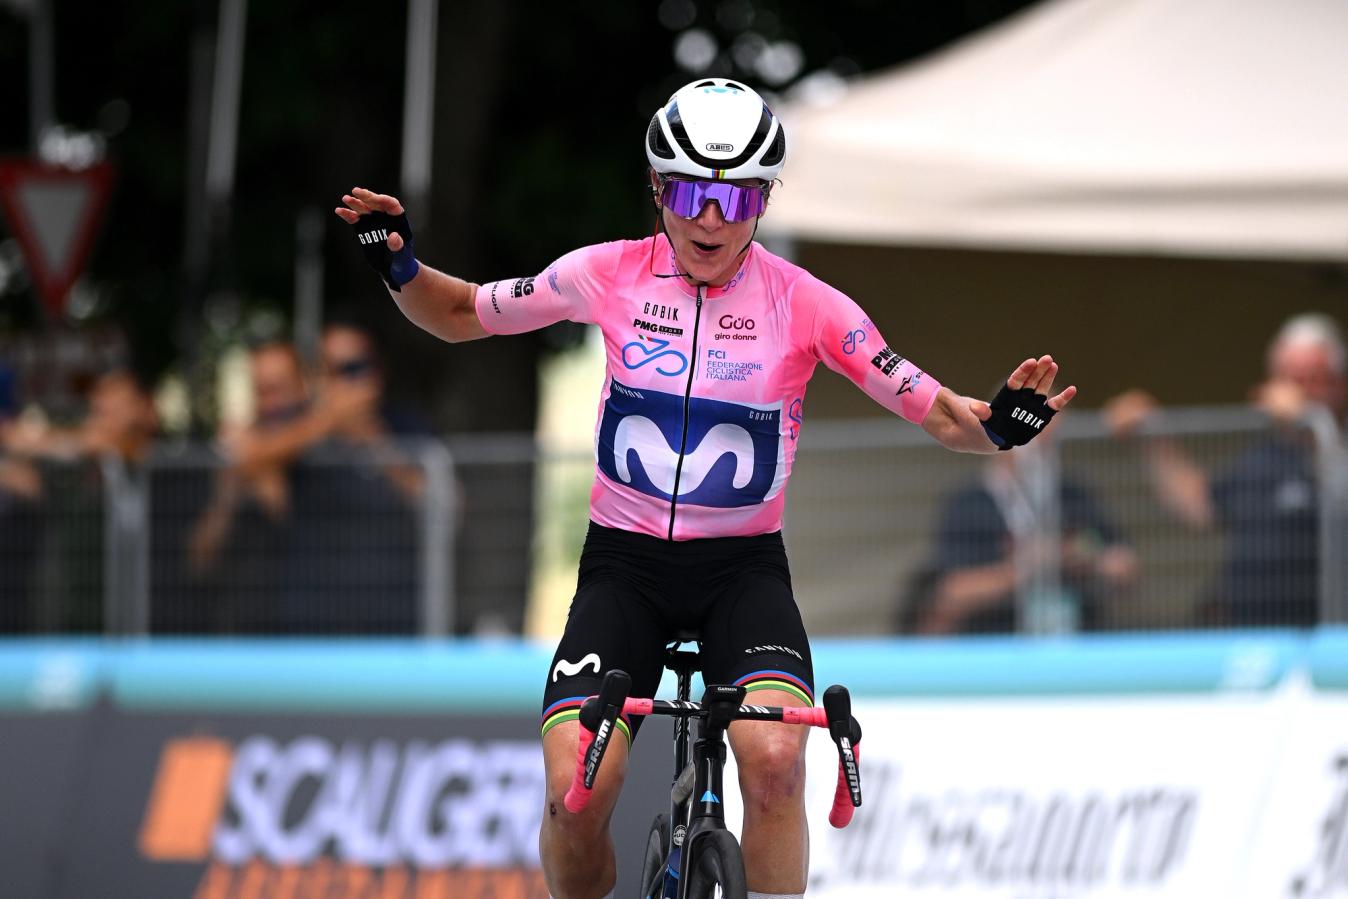 Van Vleuten celebrates another stage win as she strengthens her grip on the pink jersey